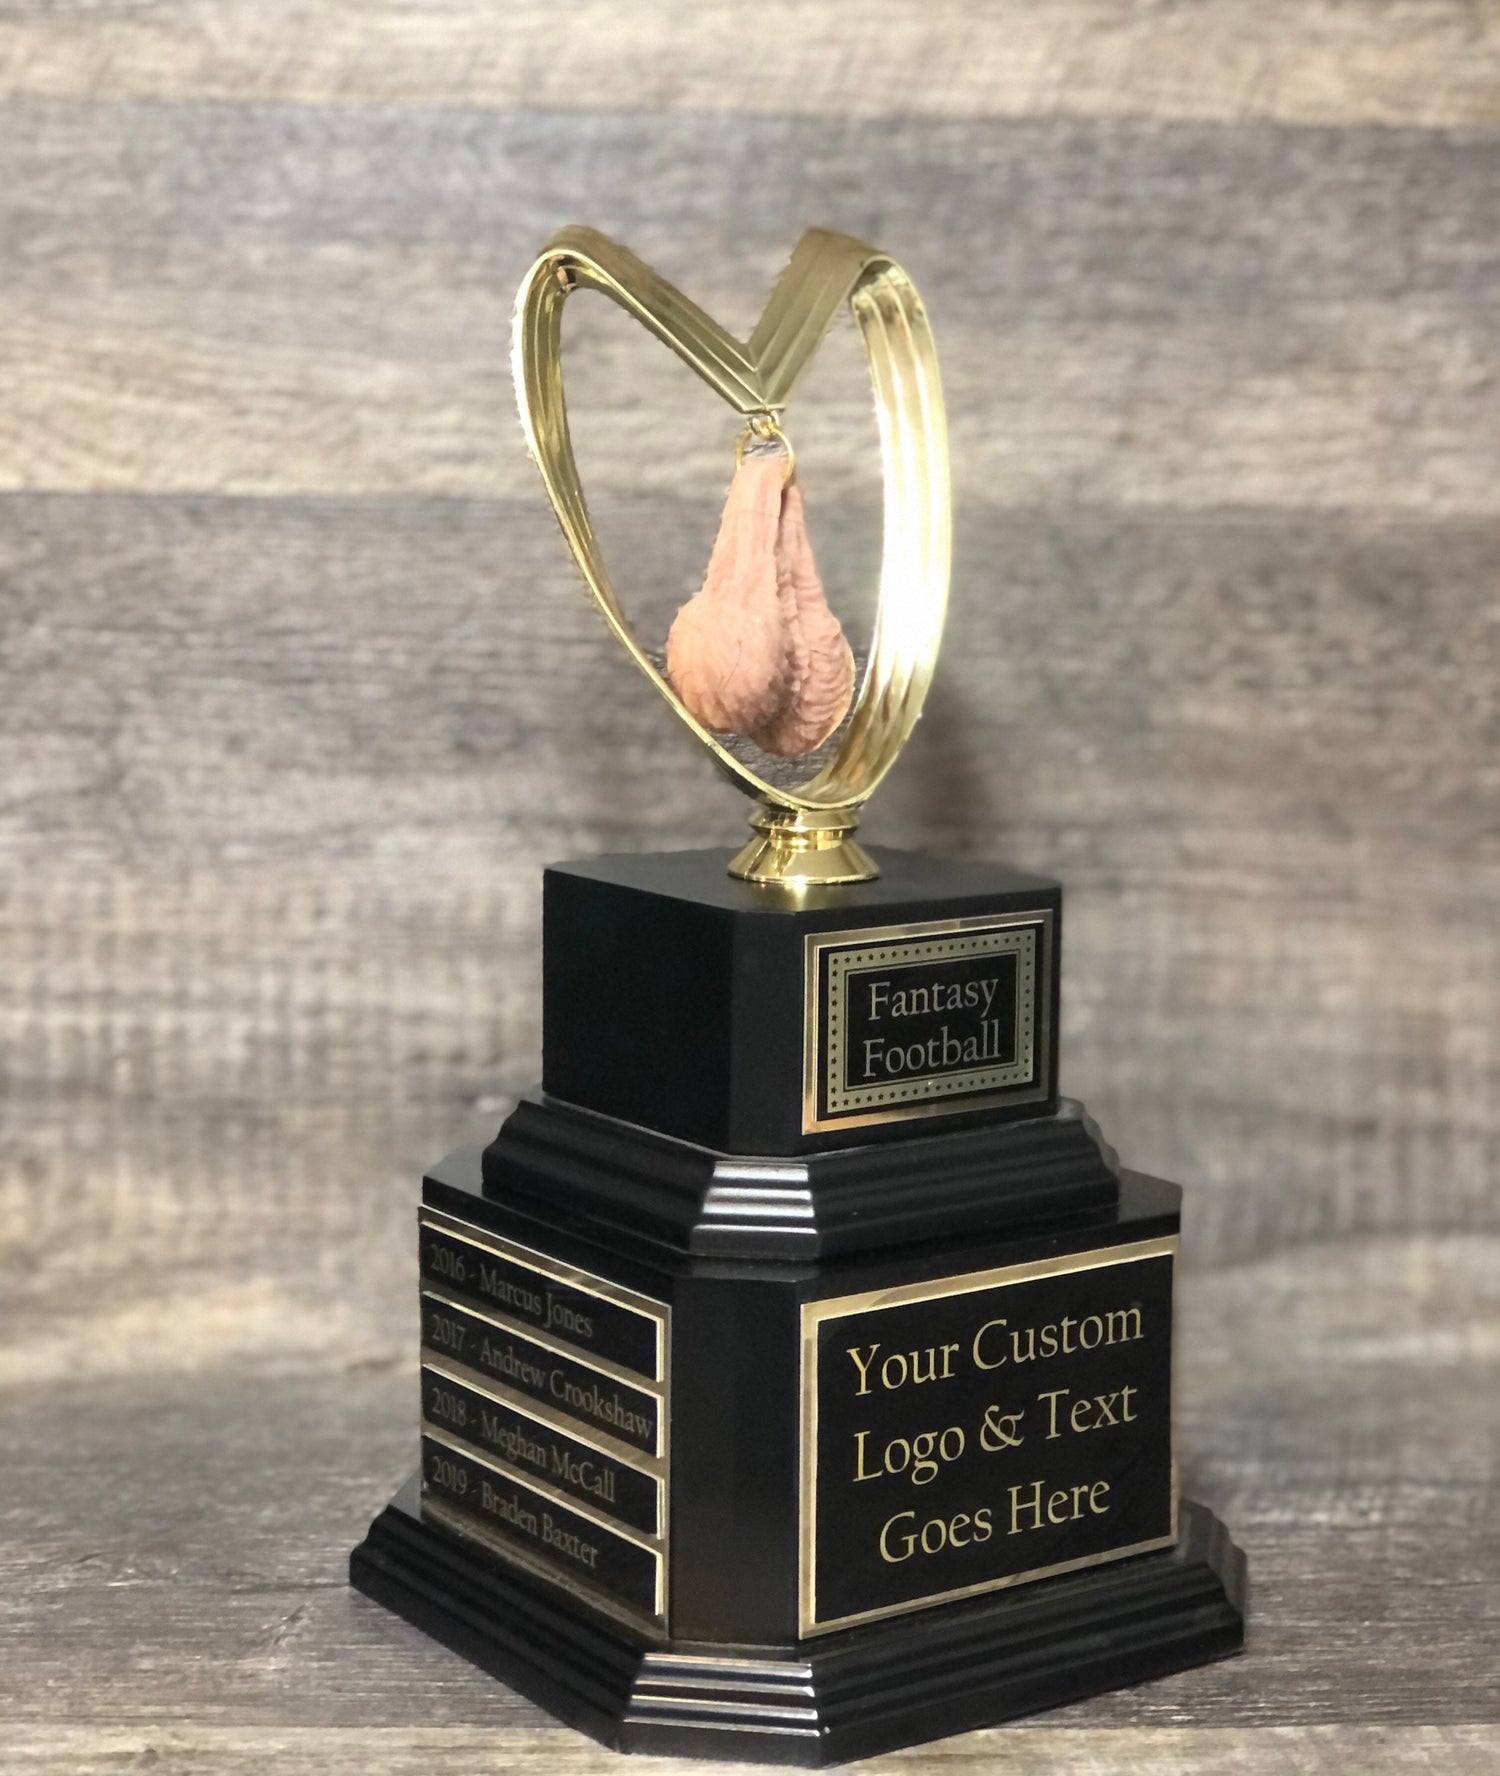 Golf Trophy Funny Loser Testicle Trophy Perpetual You Suck Last Place Trophy You've Got Balls Funny Trophy Adult Humor Testicle Guy's Trip